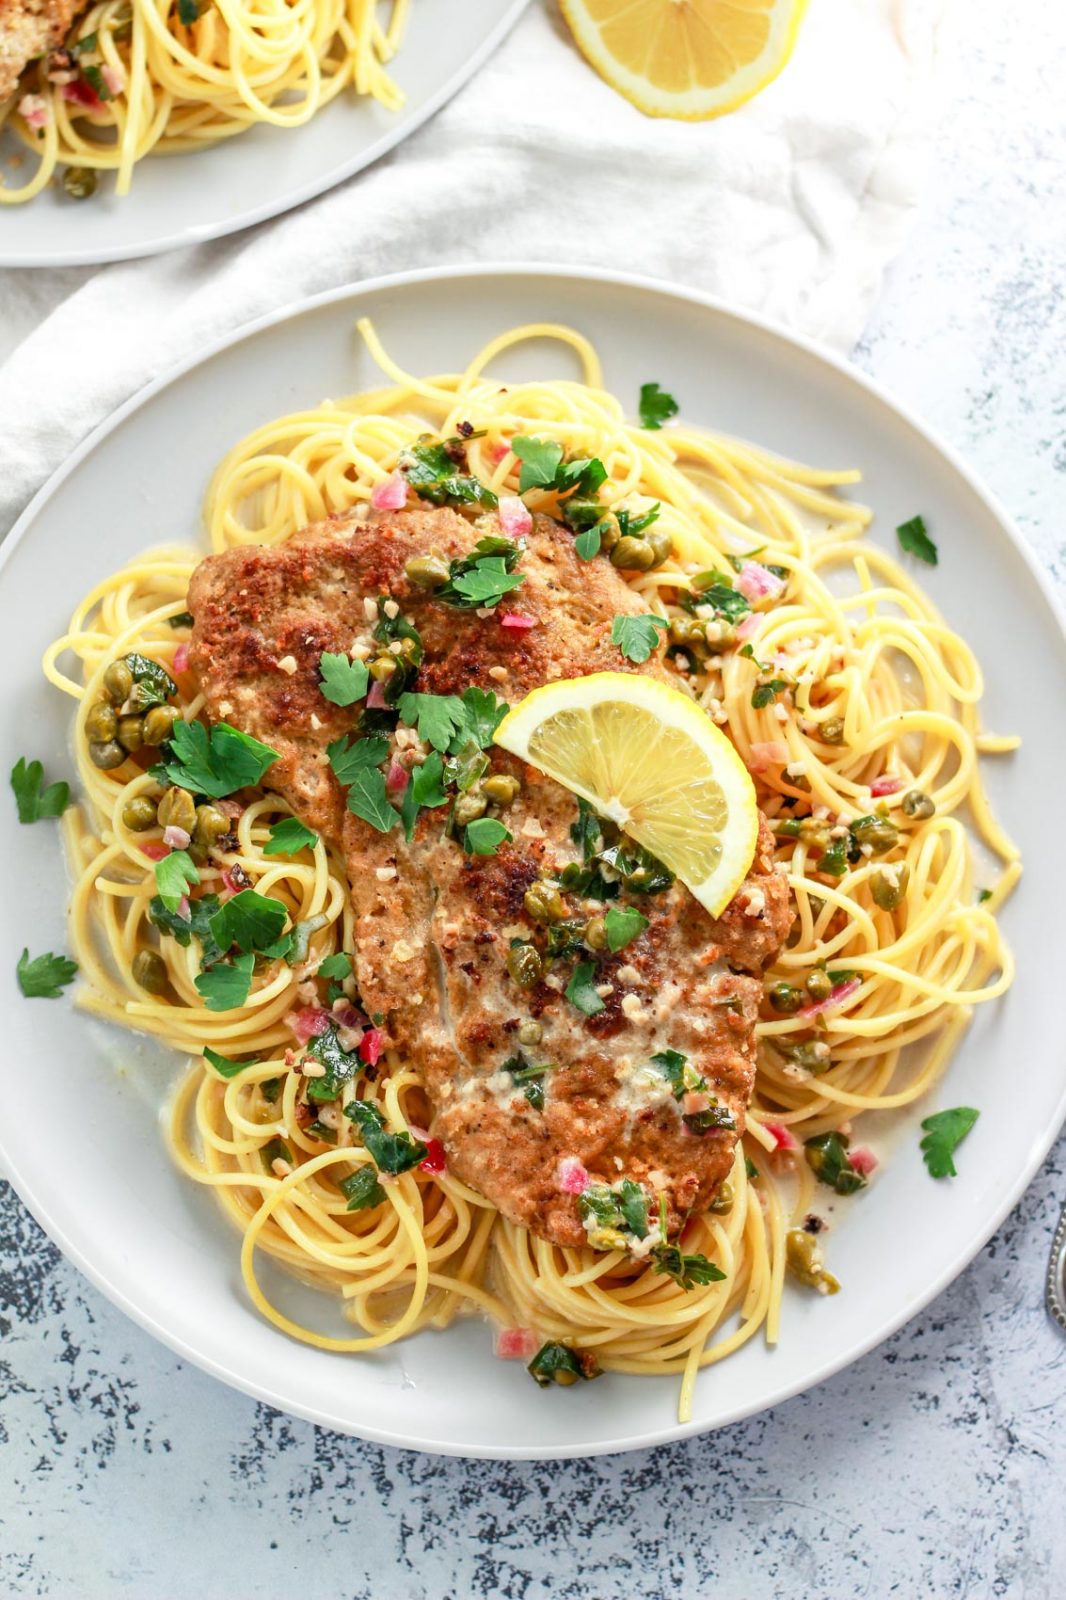 This vegan chicken piccata recipe is so close to the real thing! Homemade seitan is a protein packed, plant based meat alternative that works great in this dish. In this seitan piccata, the vegan chicken is breaded and served over pasta in a light, creamy, lemon caper sauce.